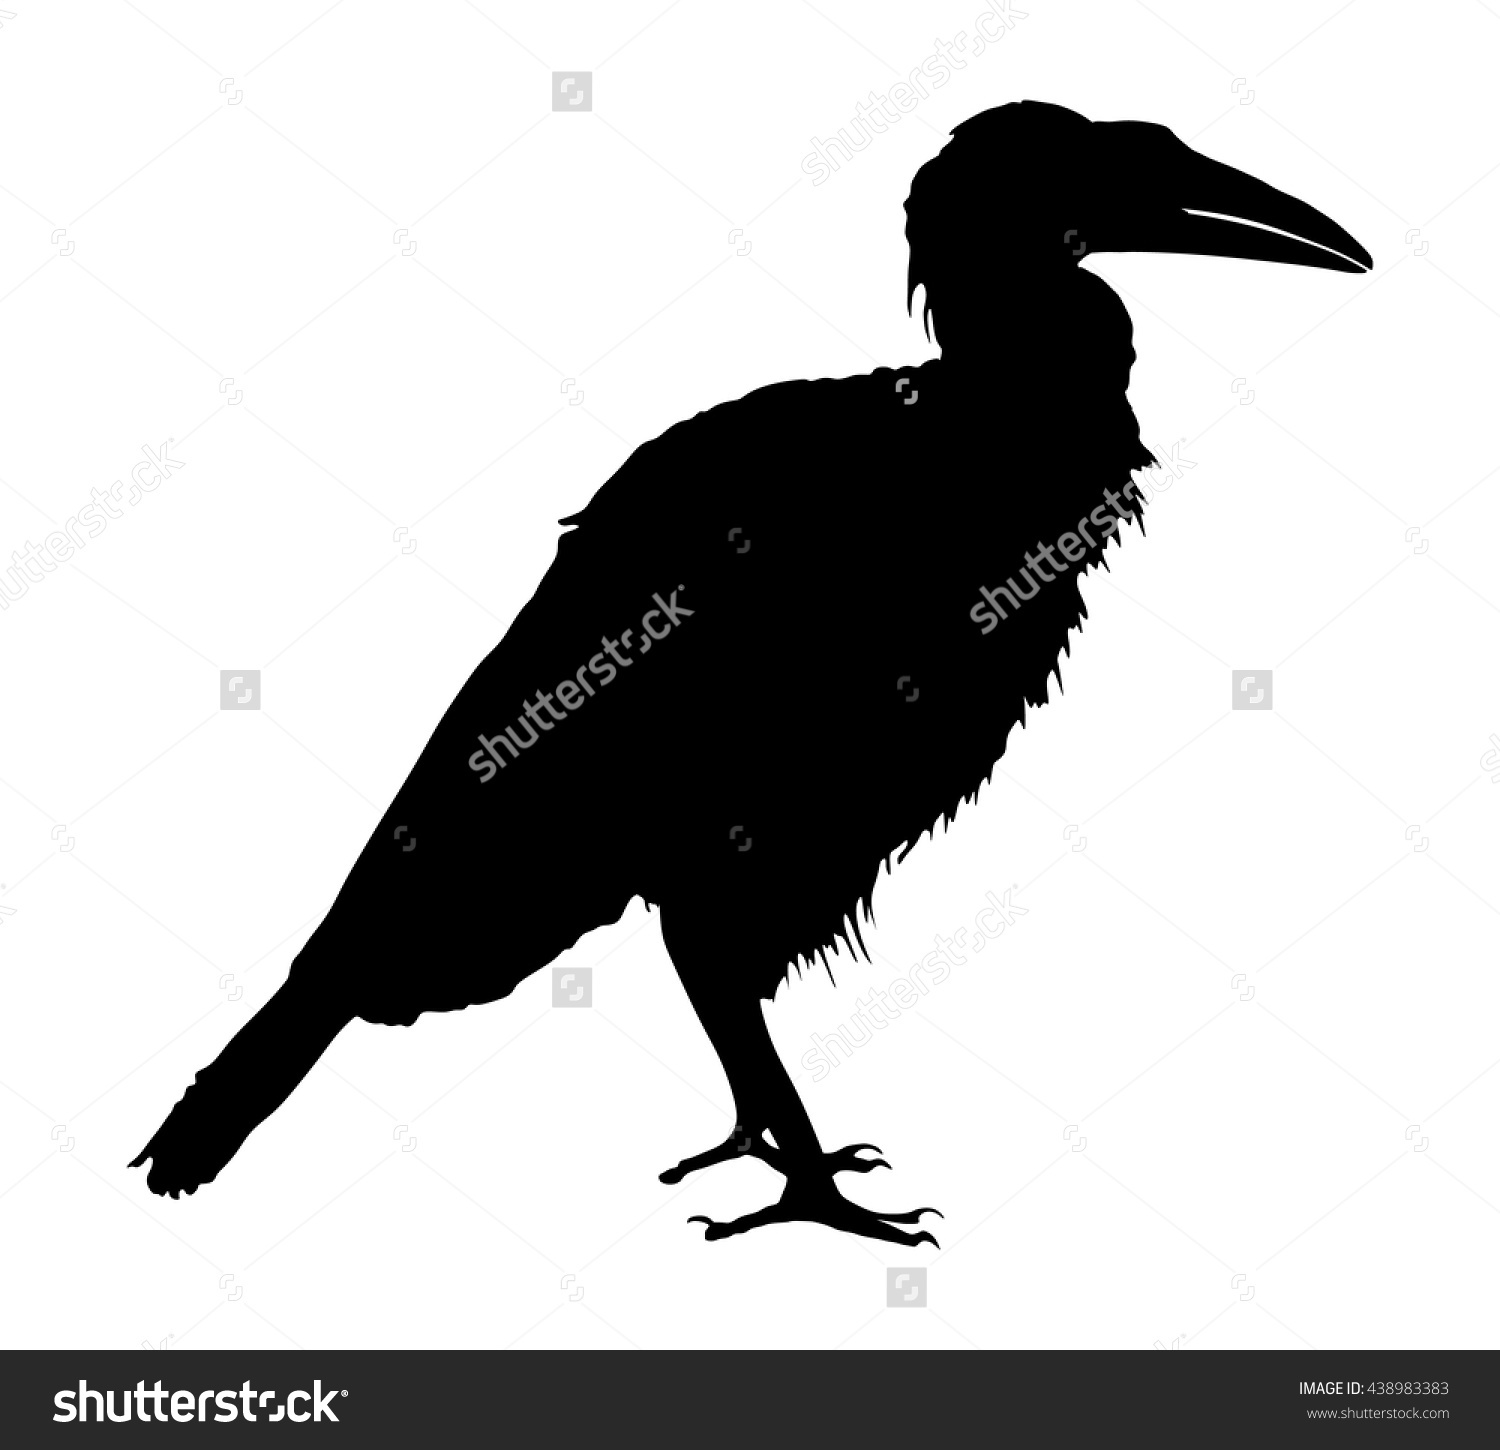 Southern Ground Hornbill clipart #1, Download drawings